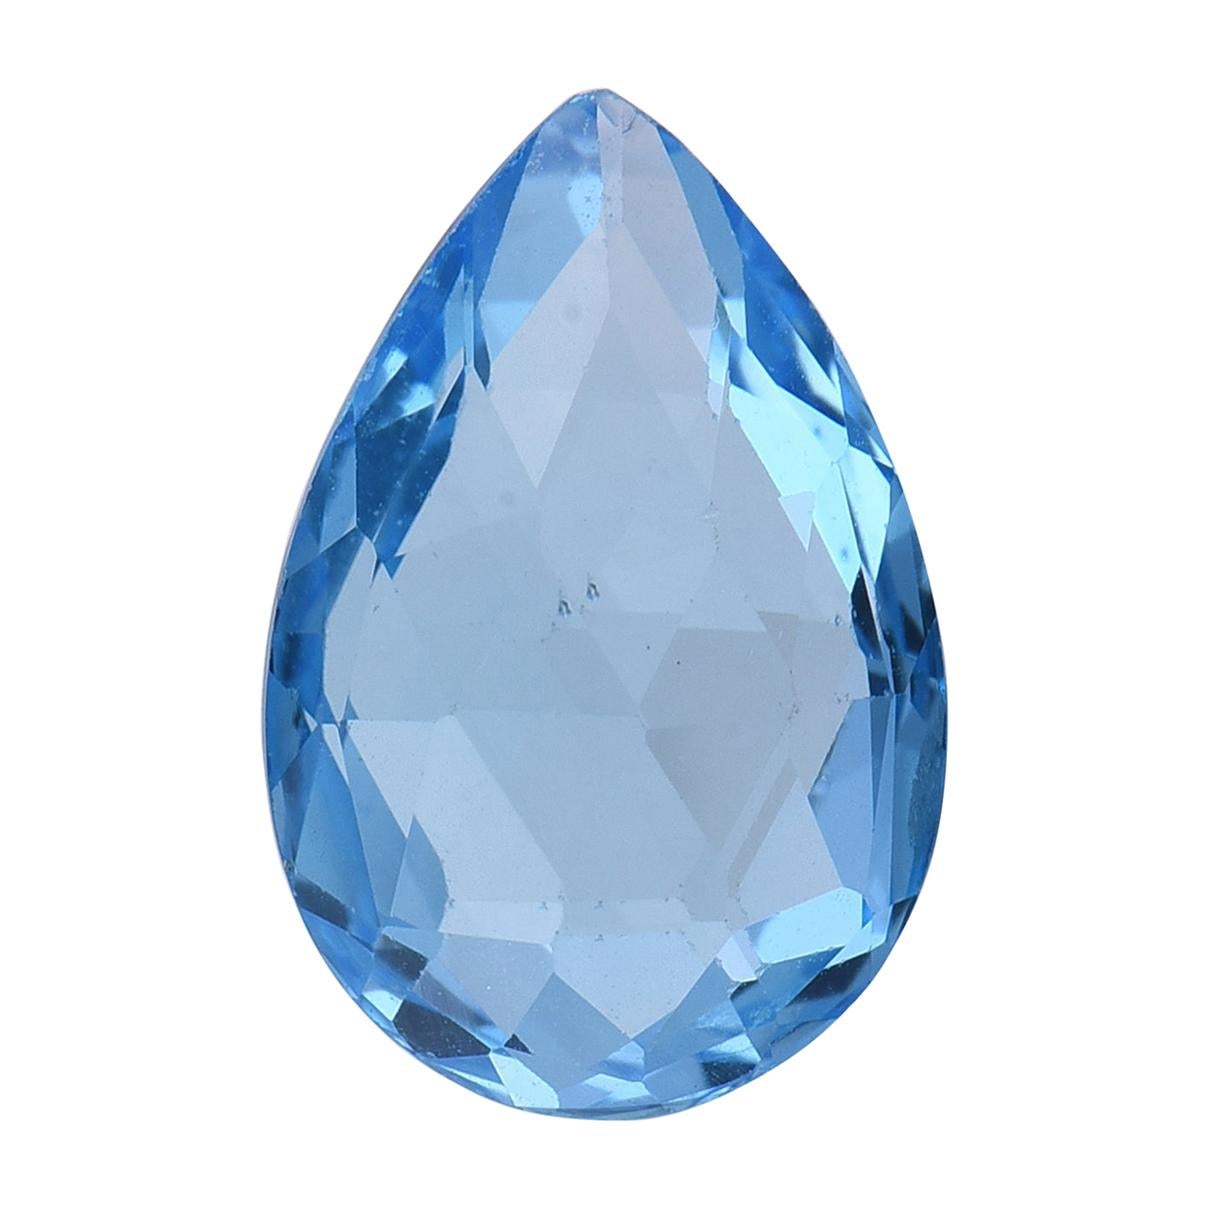 TJD Loose Natural Swiss Blue Topaz 5.15 Cts Pear Shape Gemstone for Ring/Pendant